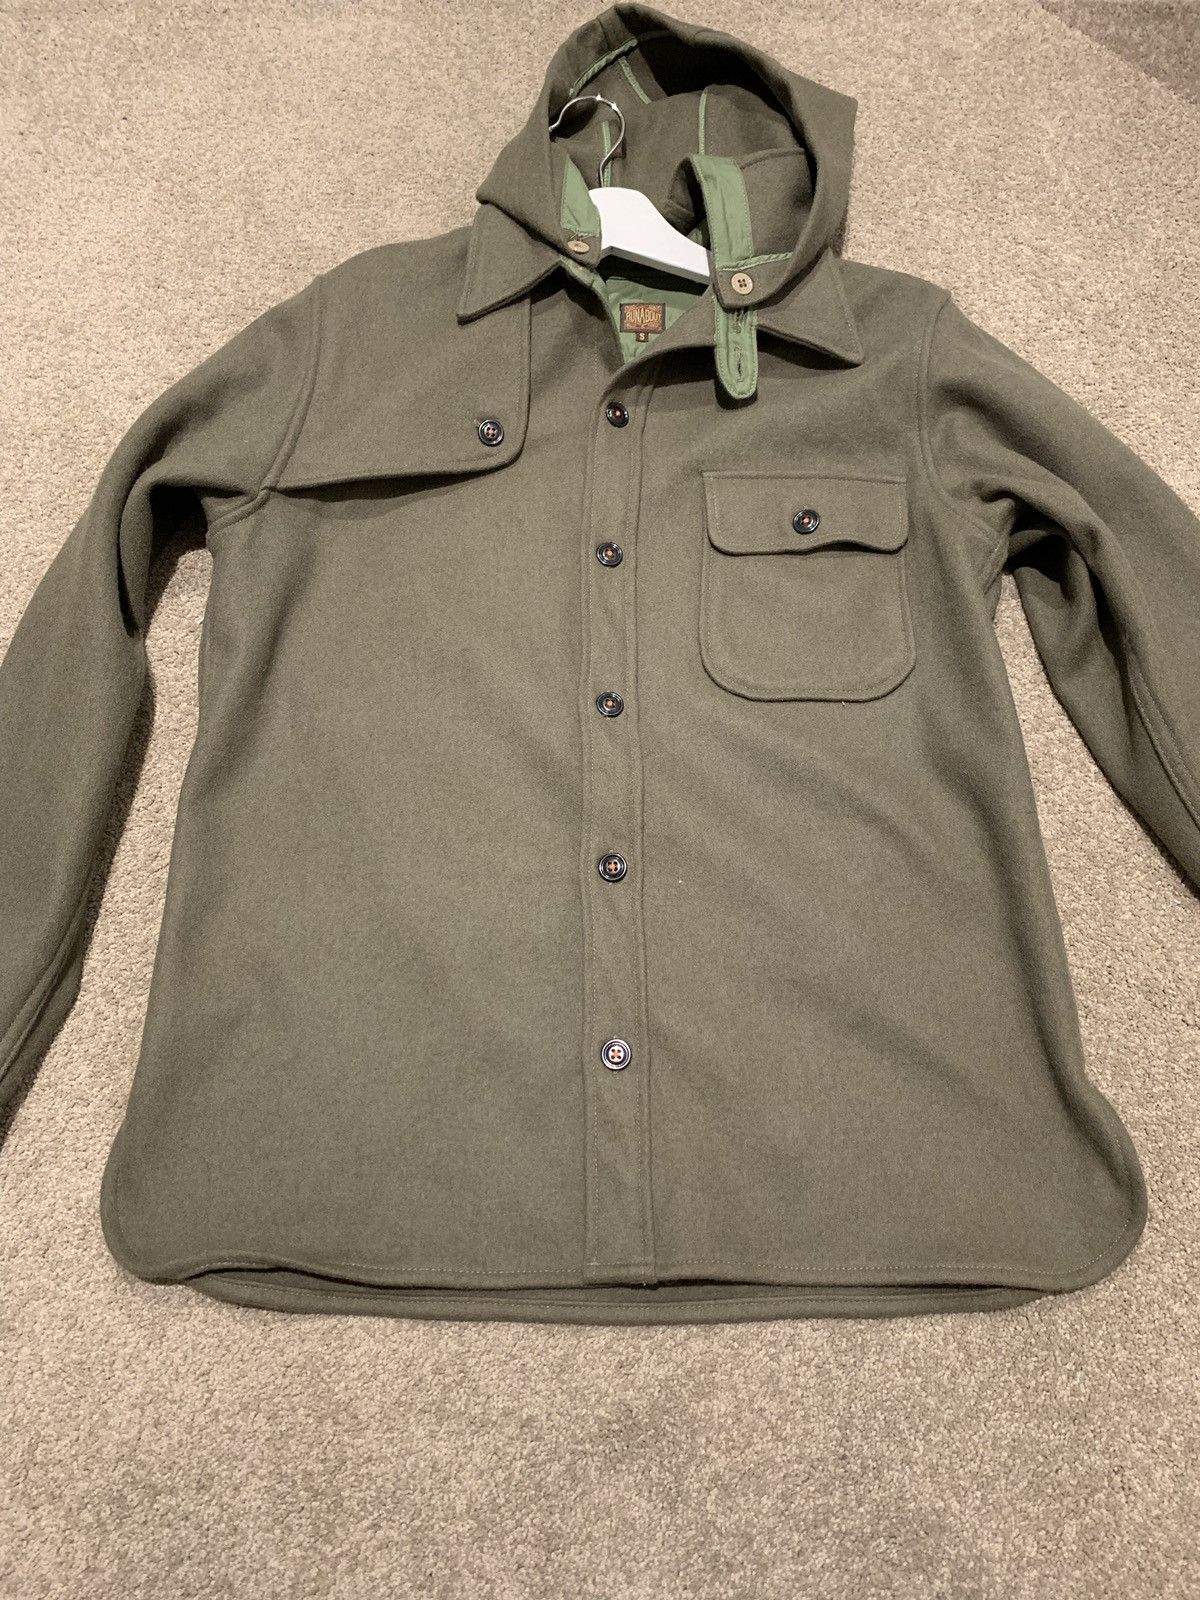 Runabout Goods Forester- Evergreen Size US S / EU 44-46 / 1 - 2 Preview